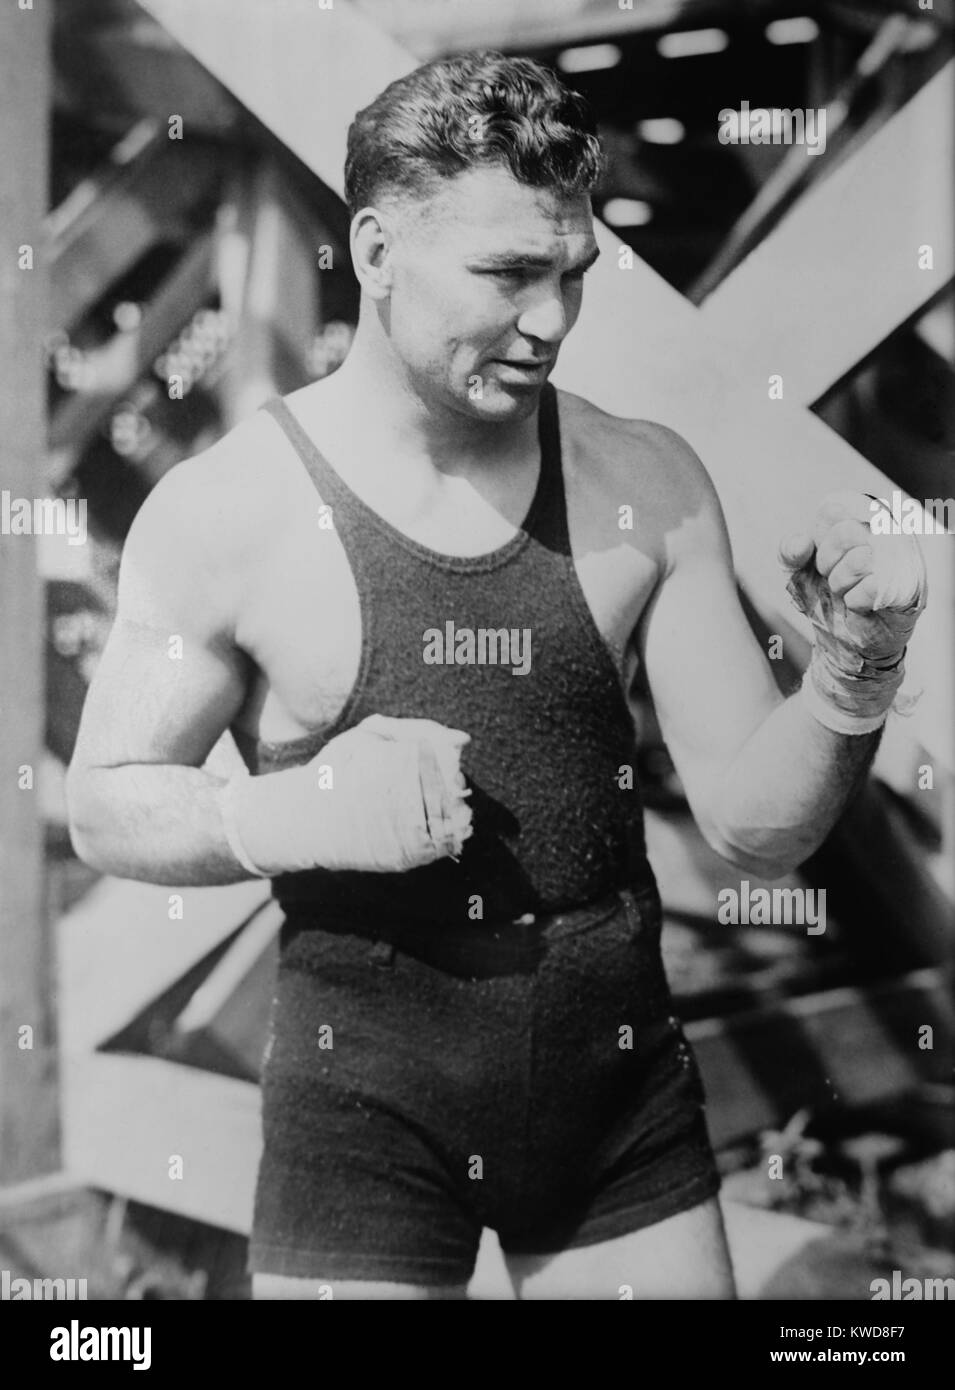 Jack Dempsey, the World Heavyweight Boxing Champion from 1919 to 1926. (BSLOC 2015 17 58) Stock Photo